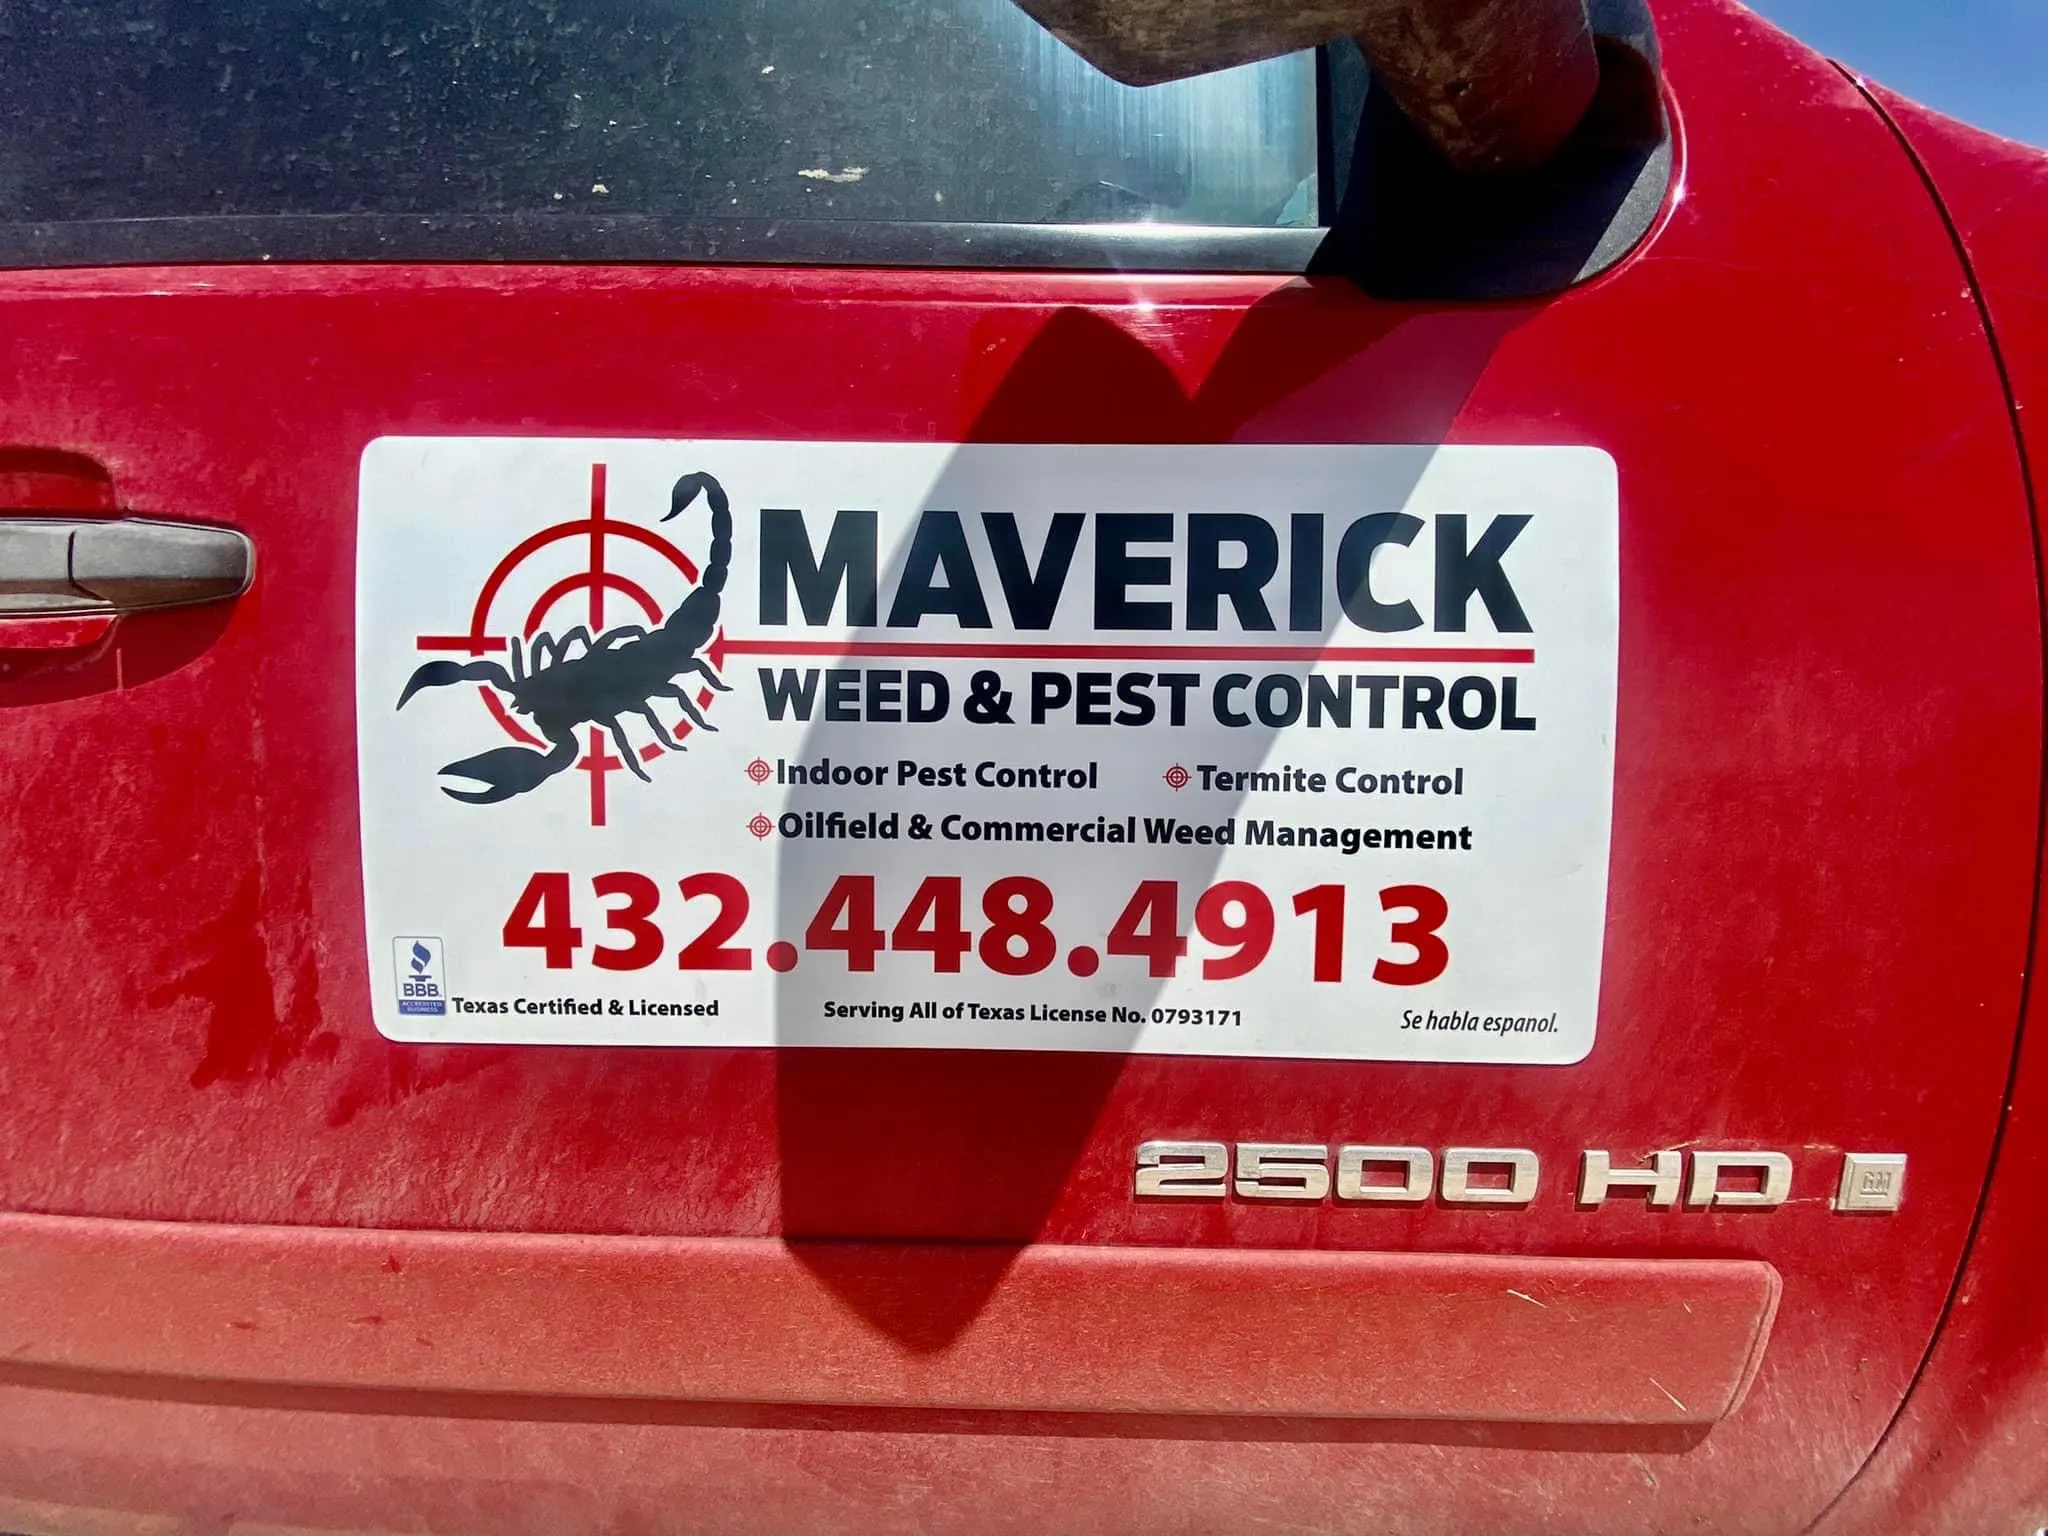 All Photos for Maverick Weed & Pest Control in All of Texas, TX